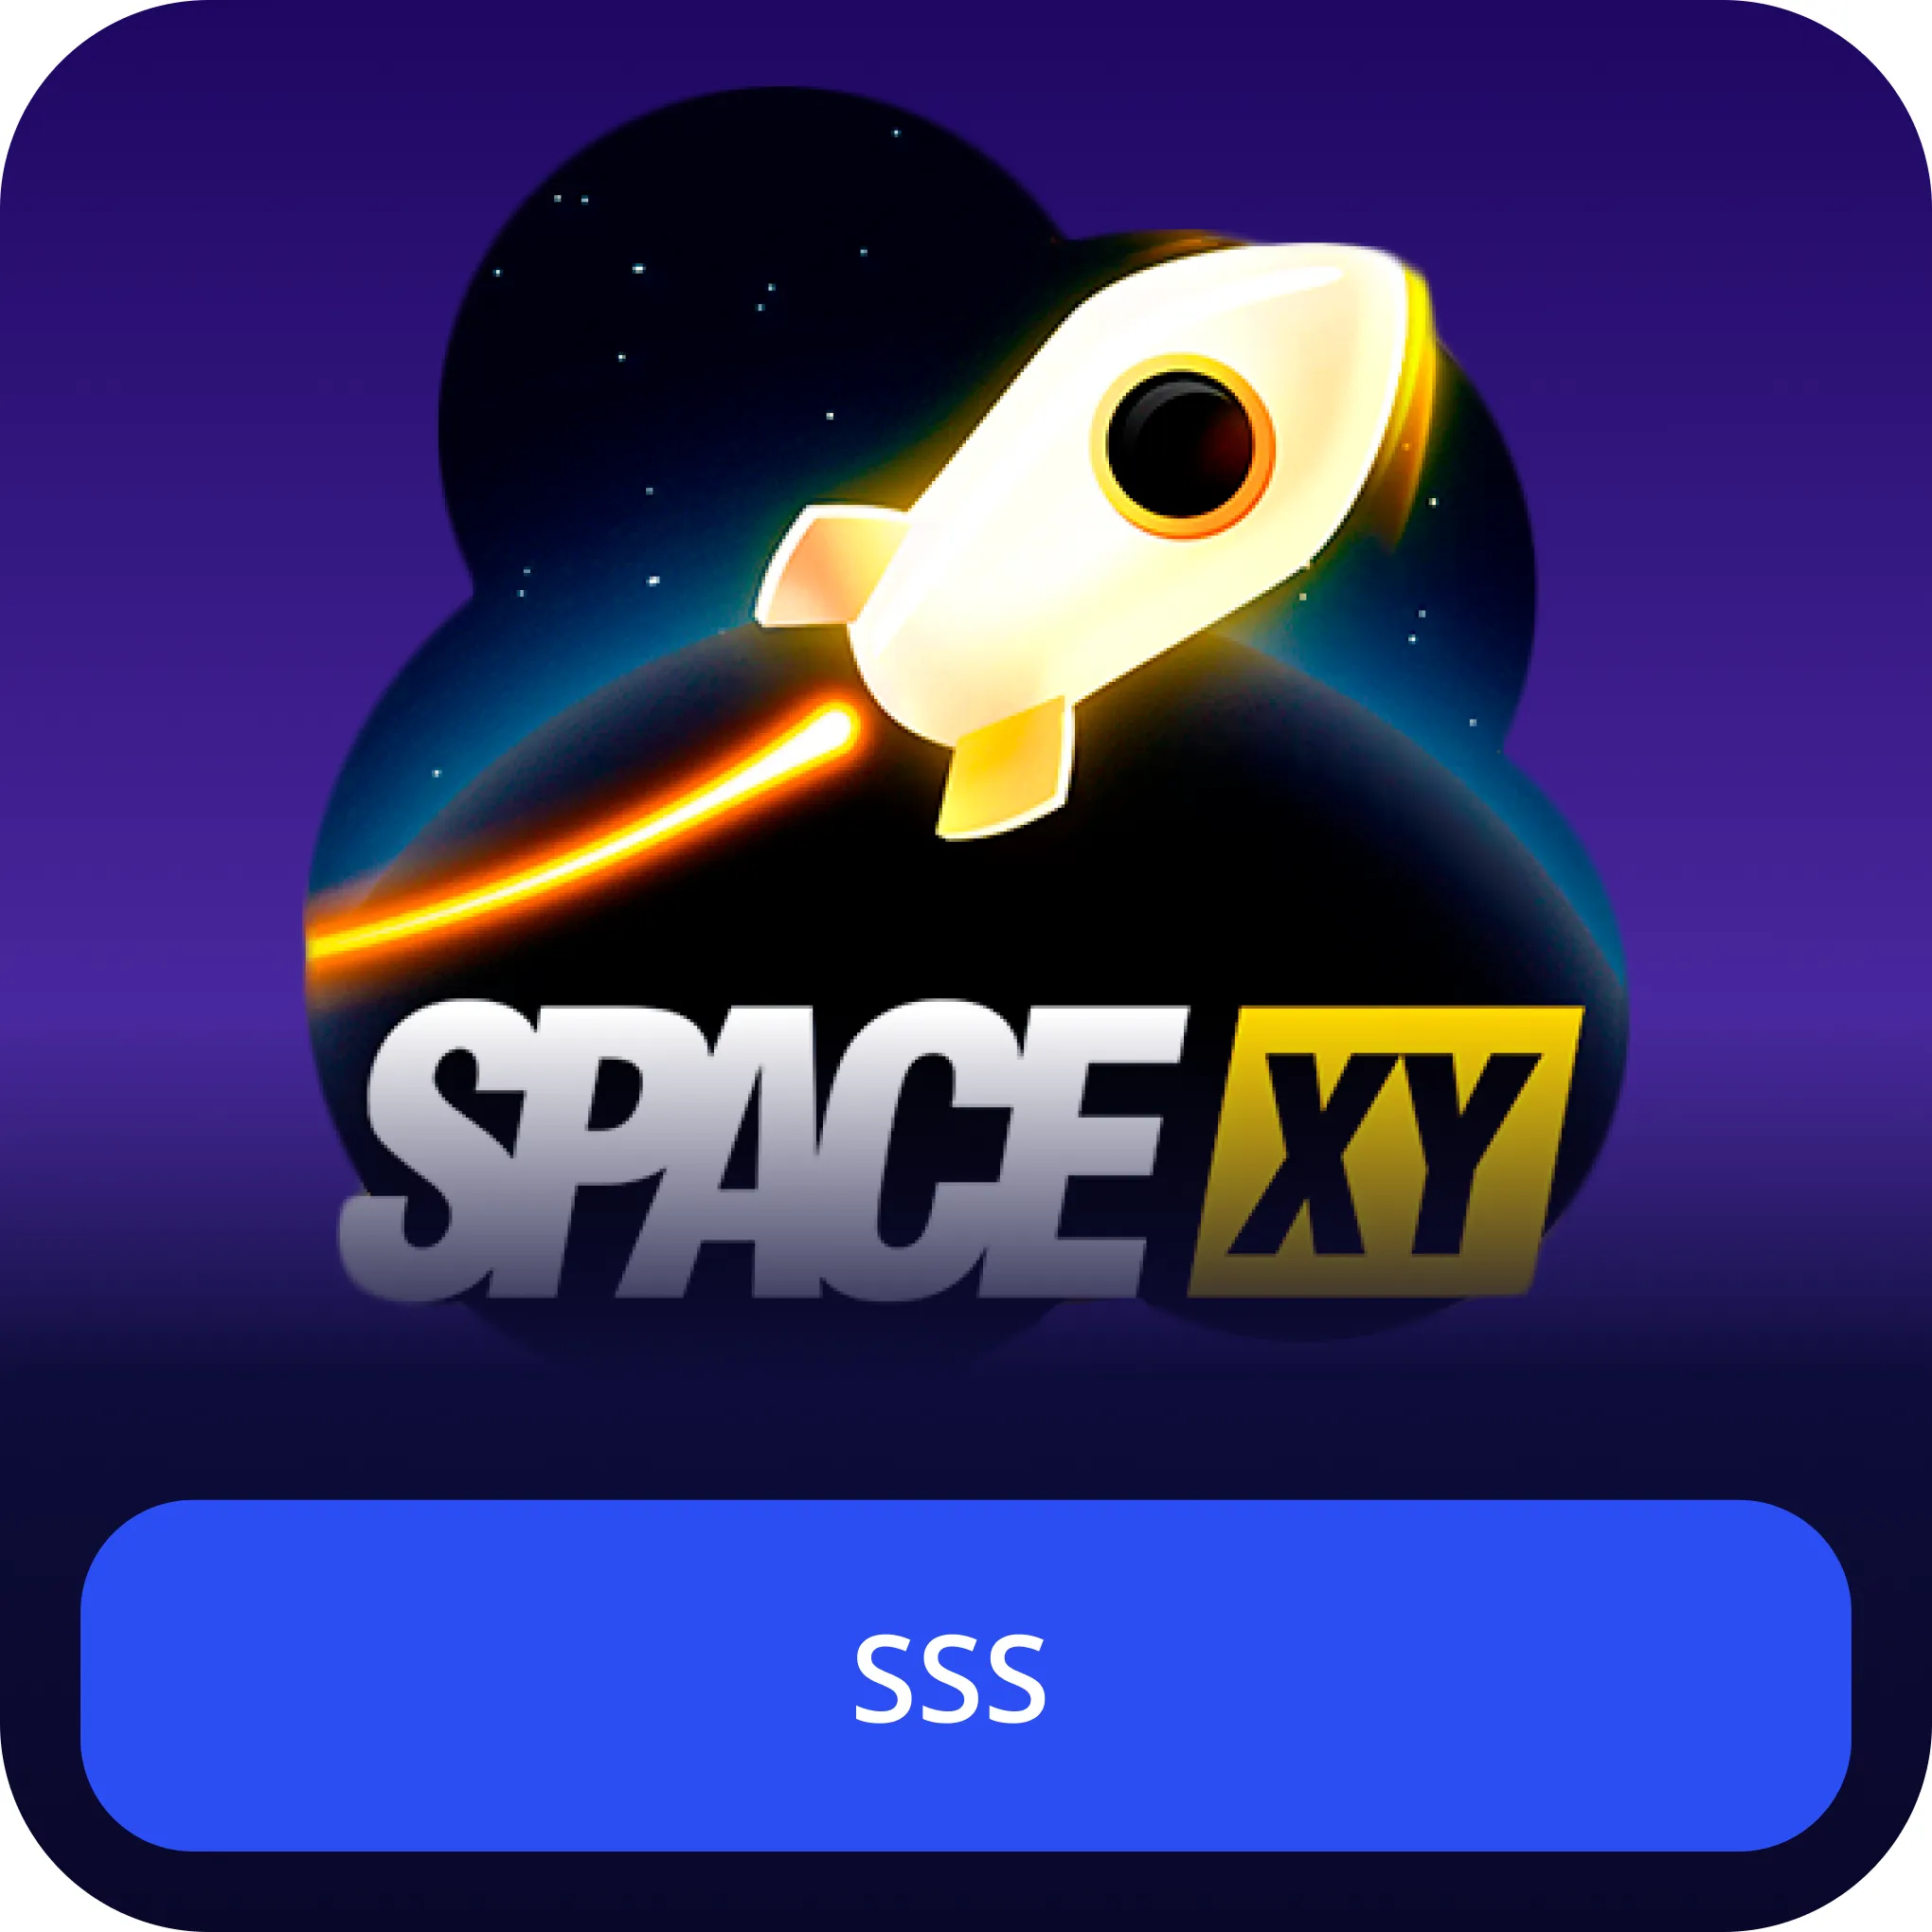 sss space xy